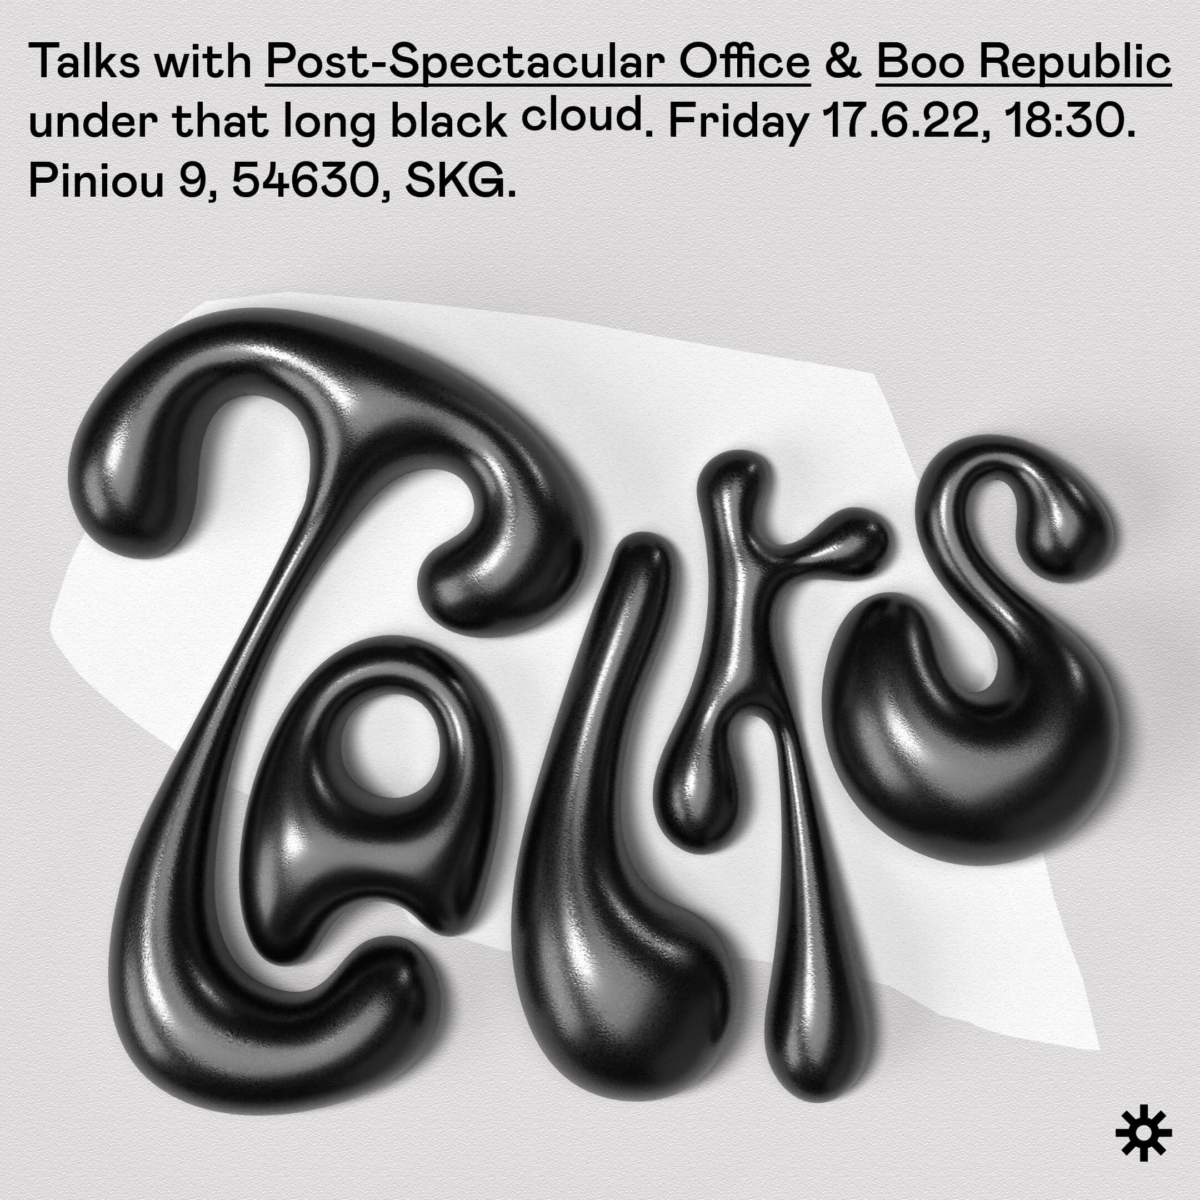 boo-republic-talks-thatlongblackcloud-cover-with-post-spectacular-office-Jun22